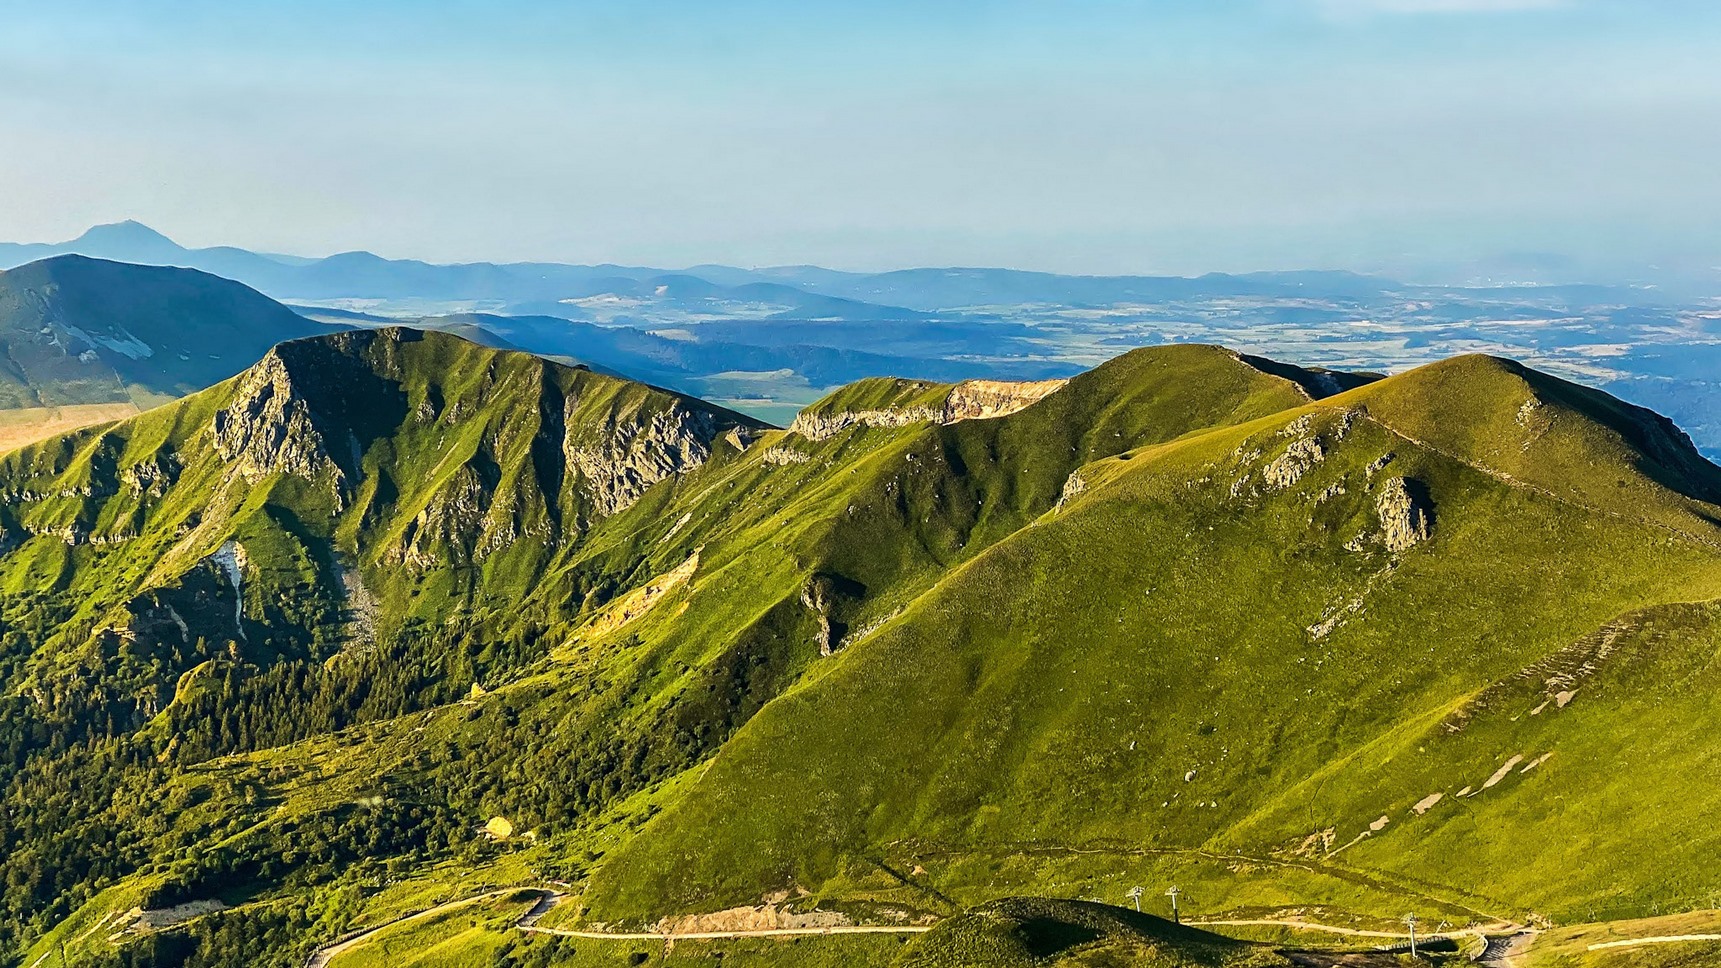 Puy de Sancy, panorama over the peaks of the Monts Dore